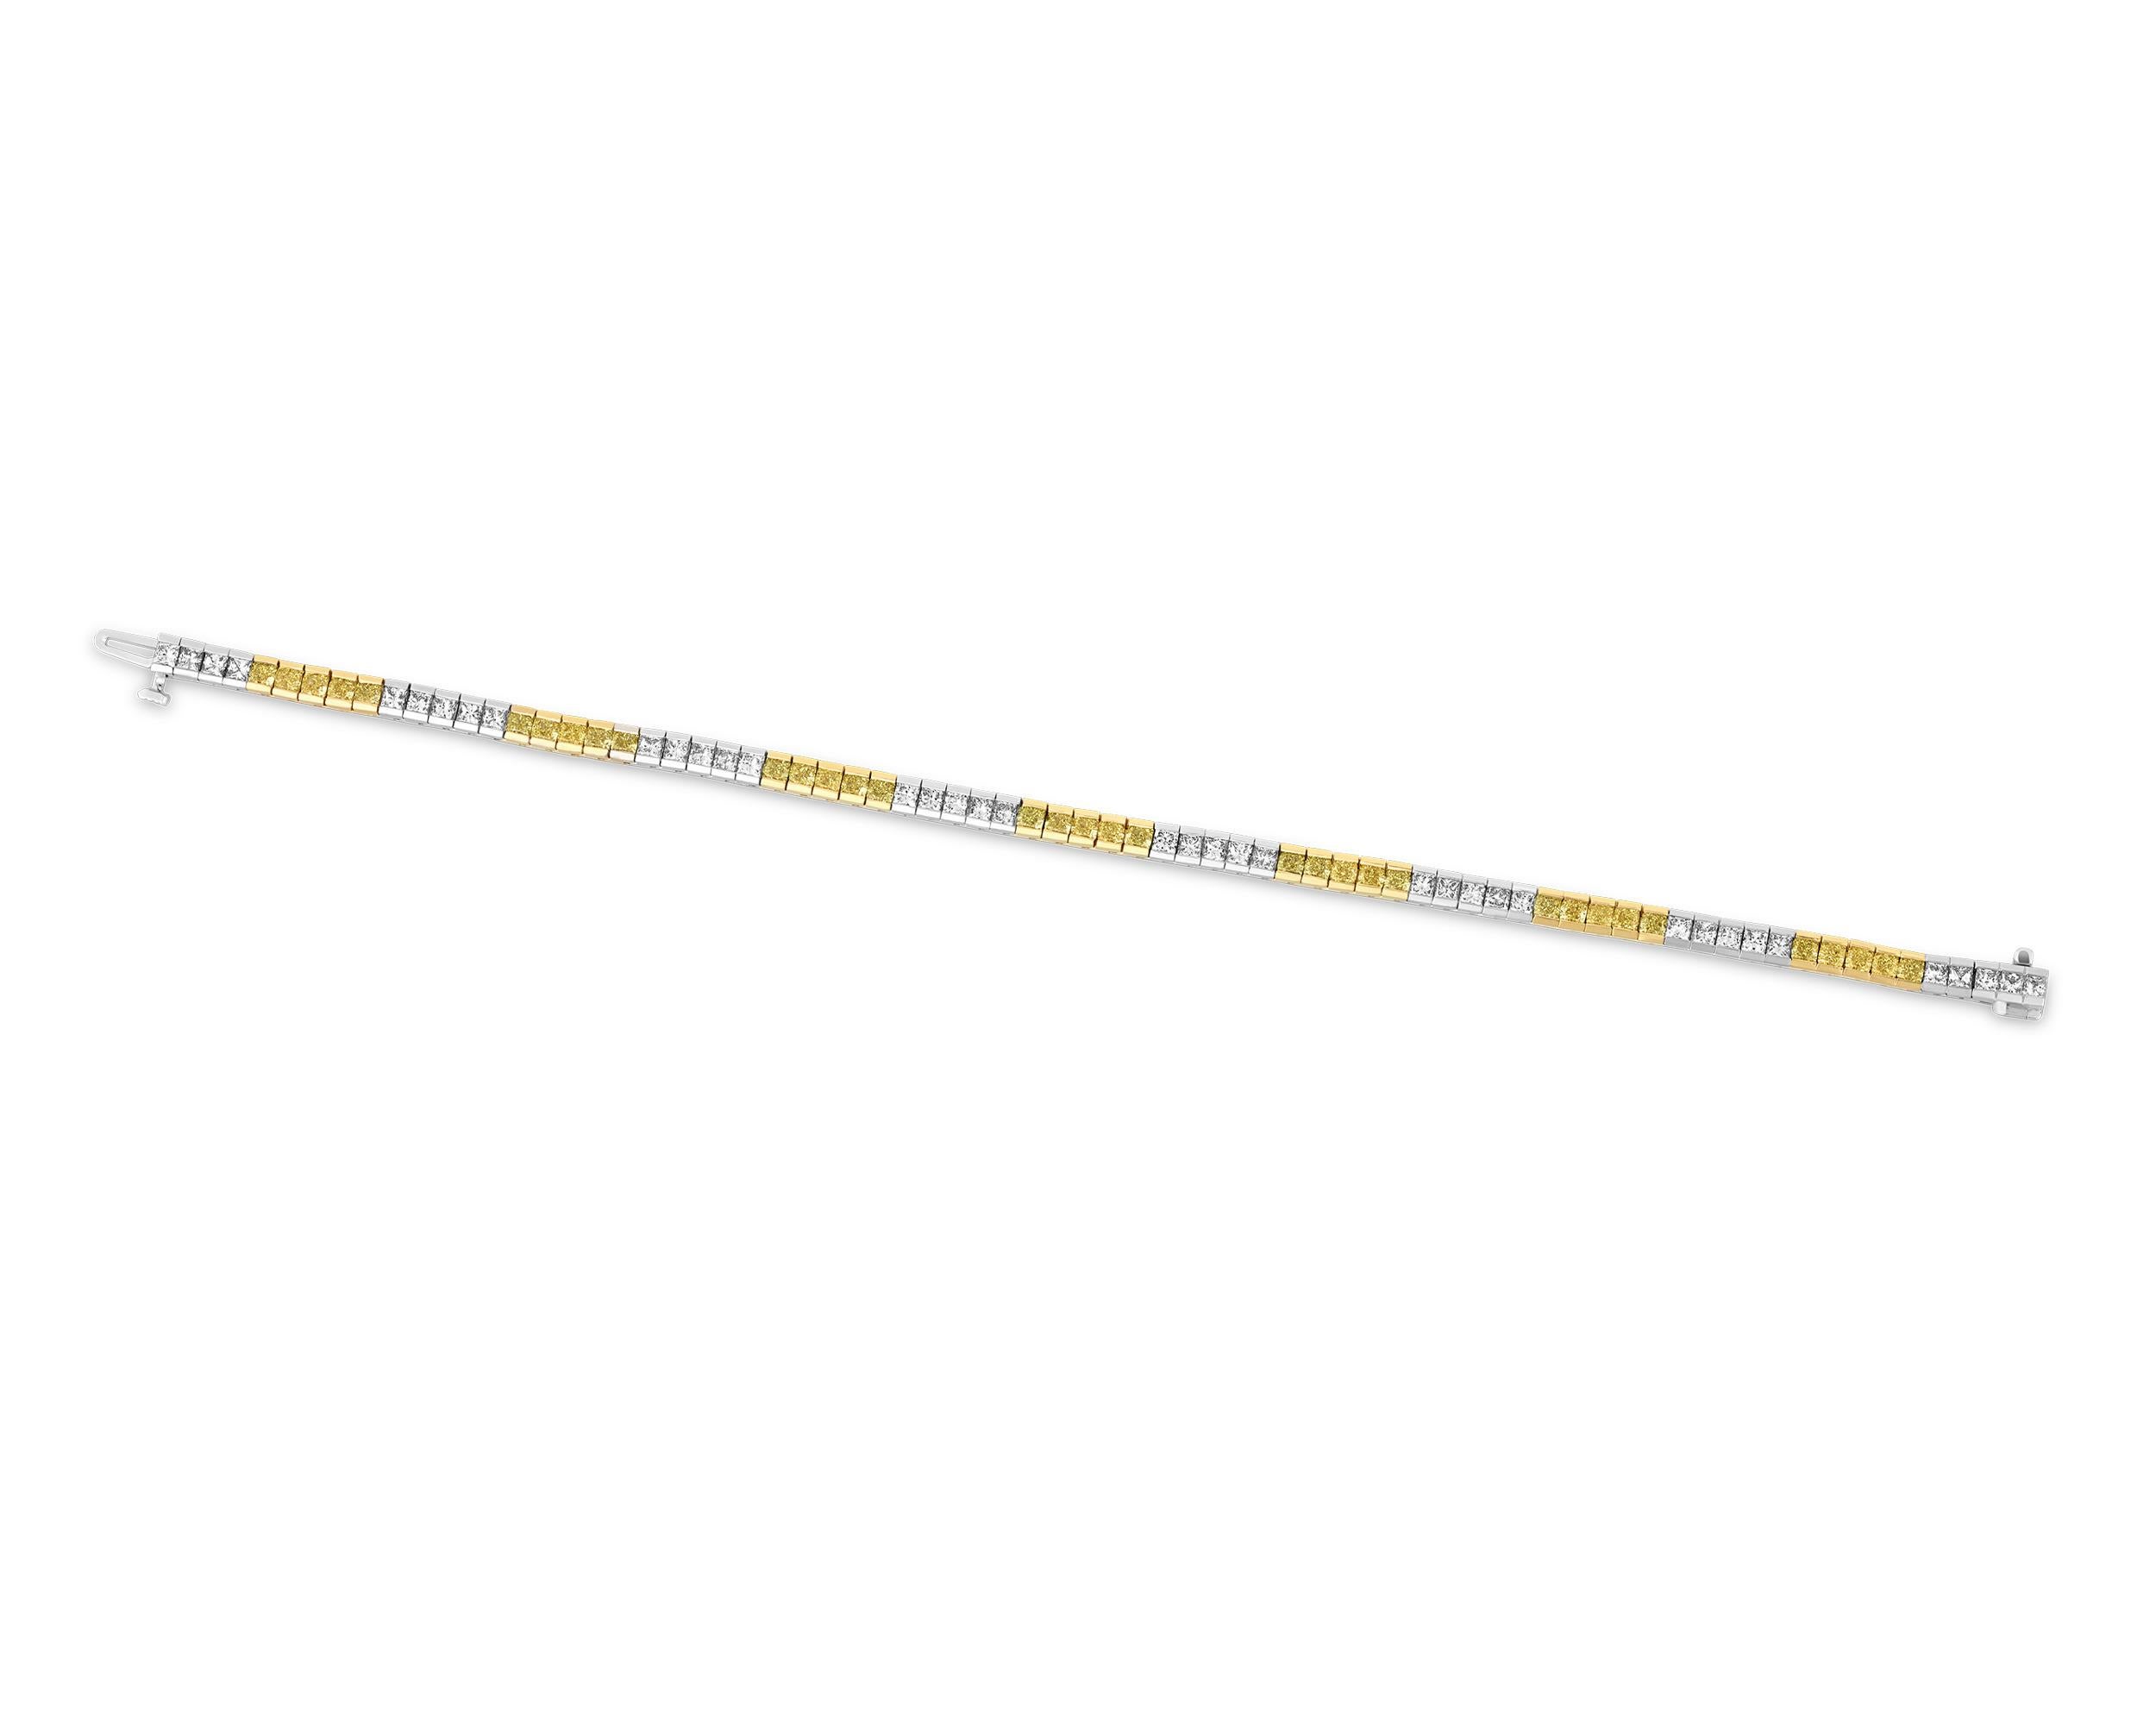 This elegant and sophisticated bracelet features yellow and white diamonds neatly arranged in a chic straight line. The thirty-five yellow diamonds total 3.80 carats and the thirty-nine white diamonds total 3.05 carats. The classic tennis bracelet